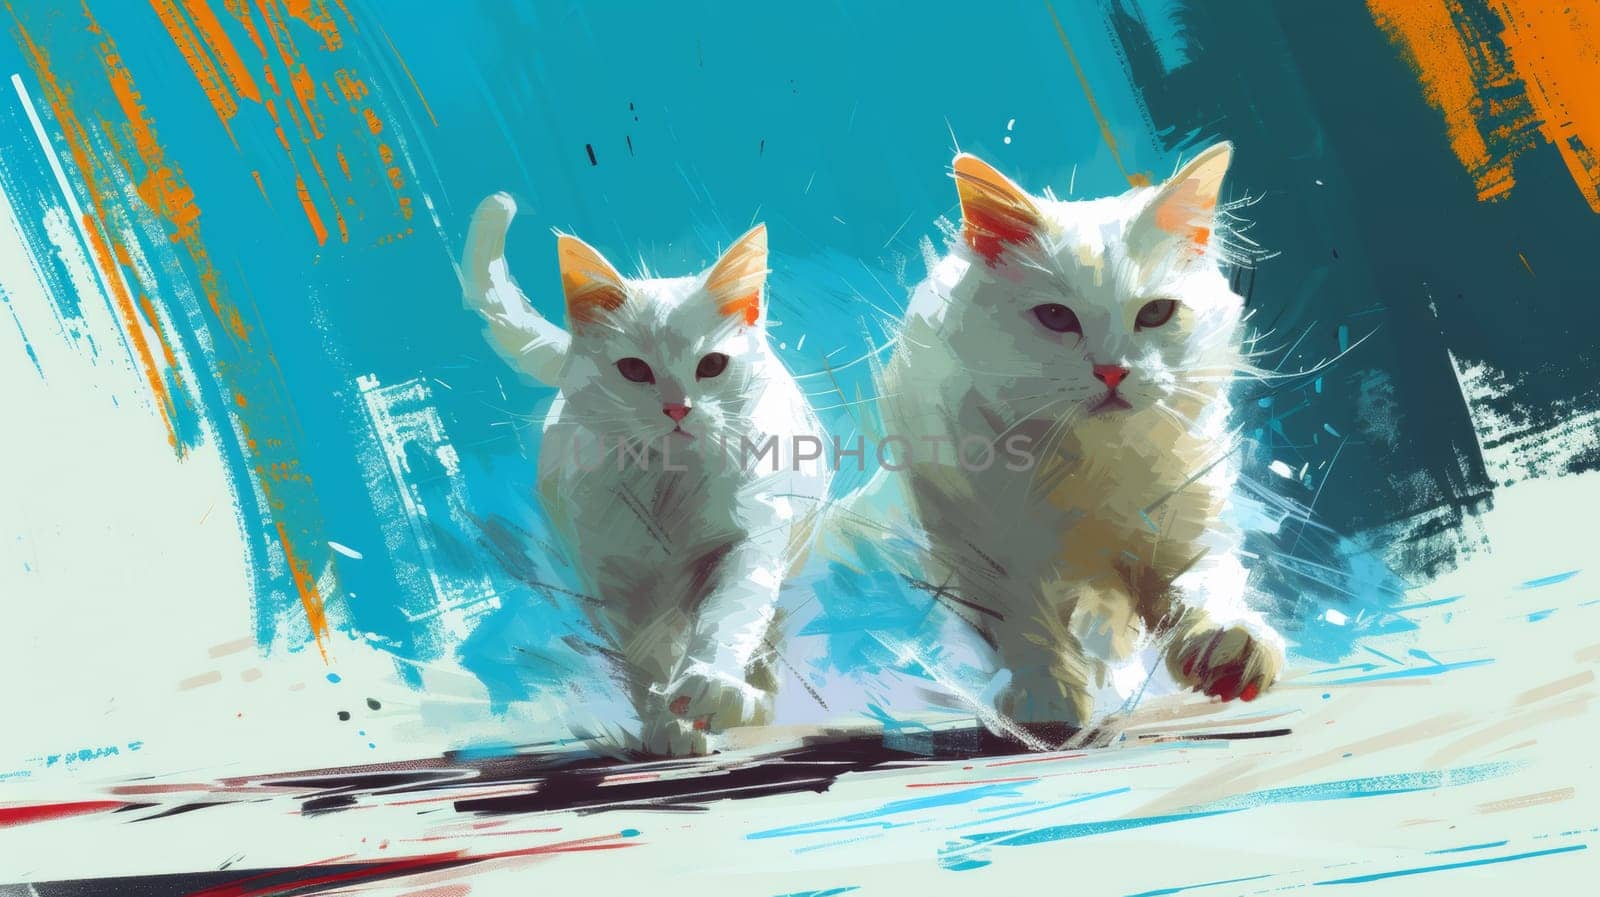 Two white cats running together in a colorful painting